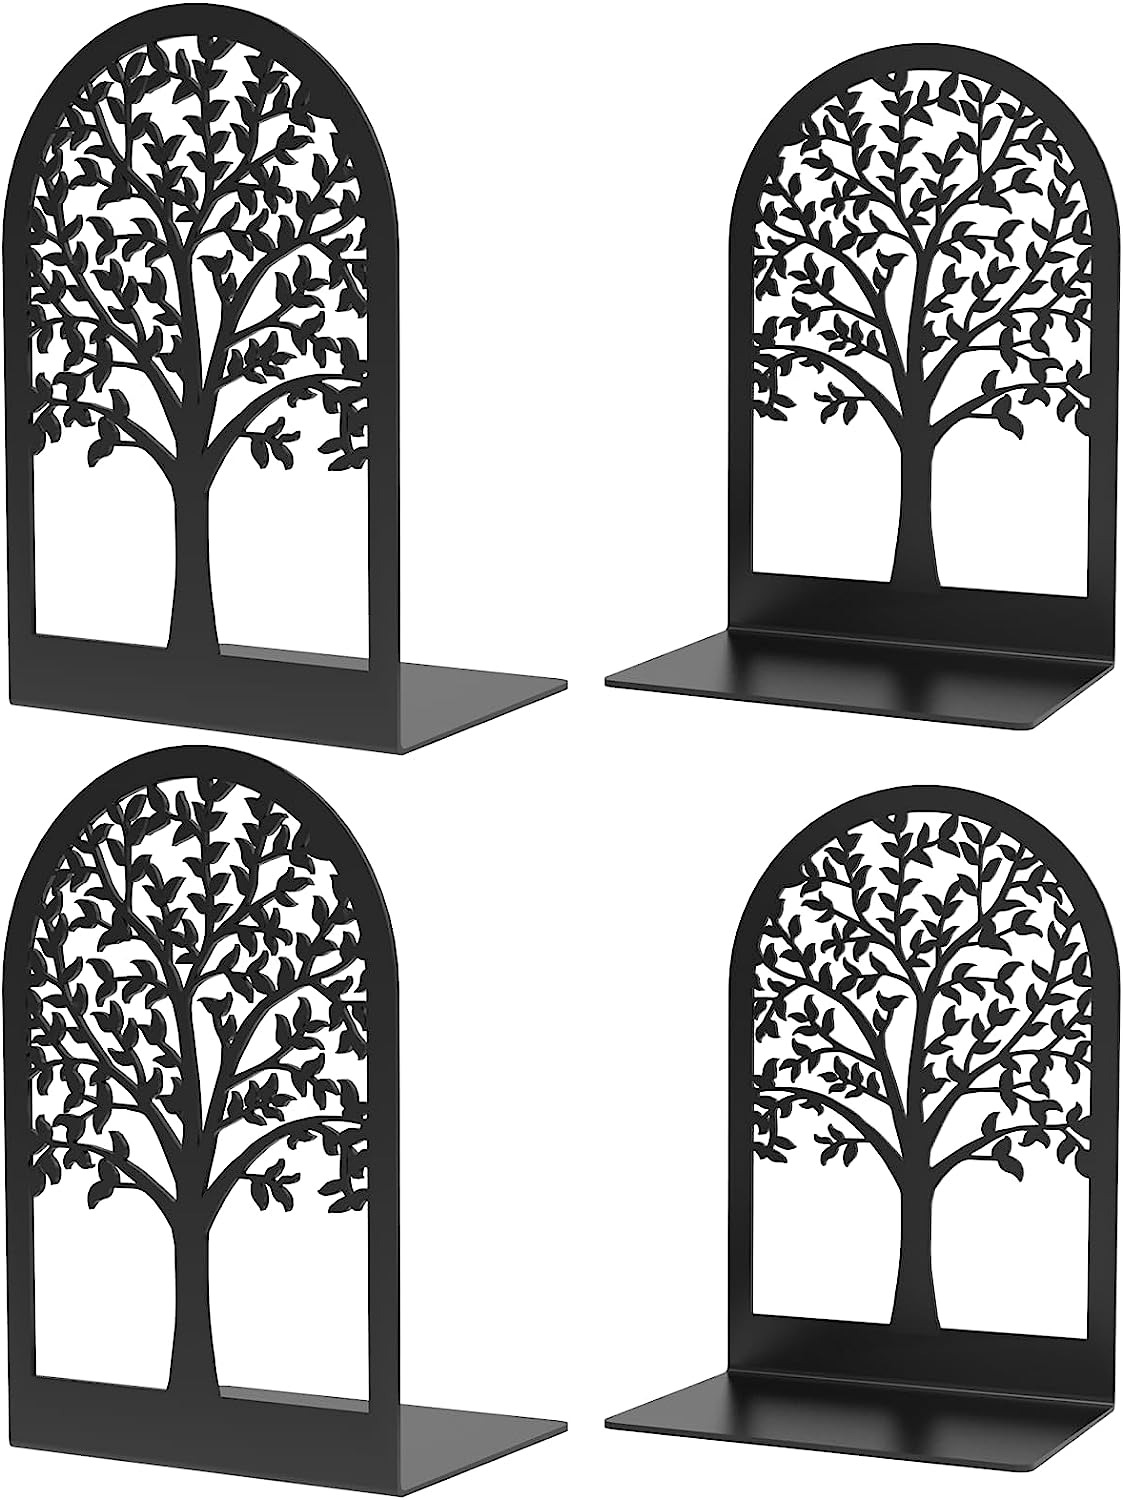 Book Ends, Bookends, Tree Book Ends for Shelves, Modern Book Ends Decorative, Me